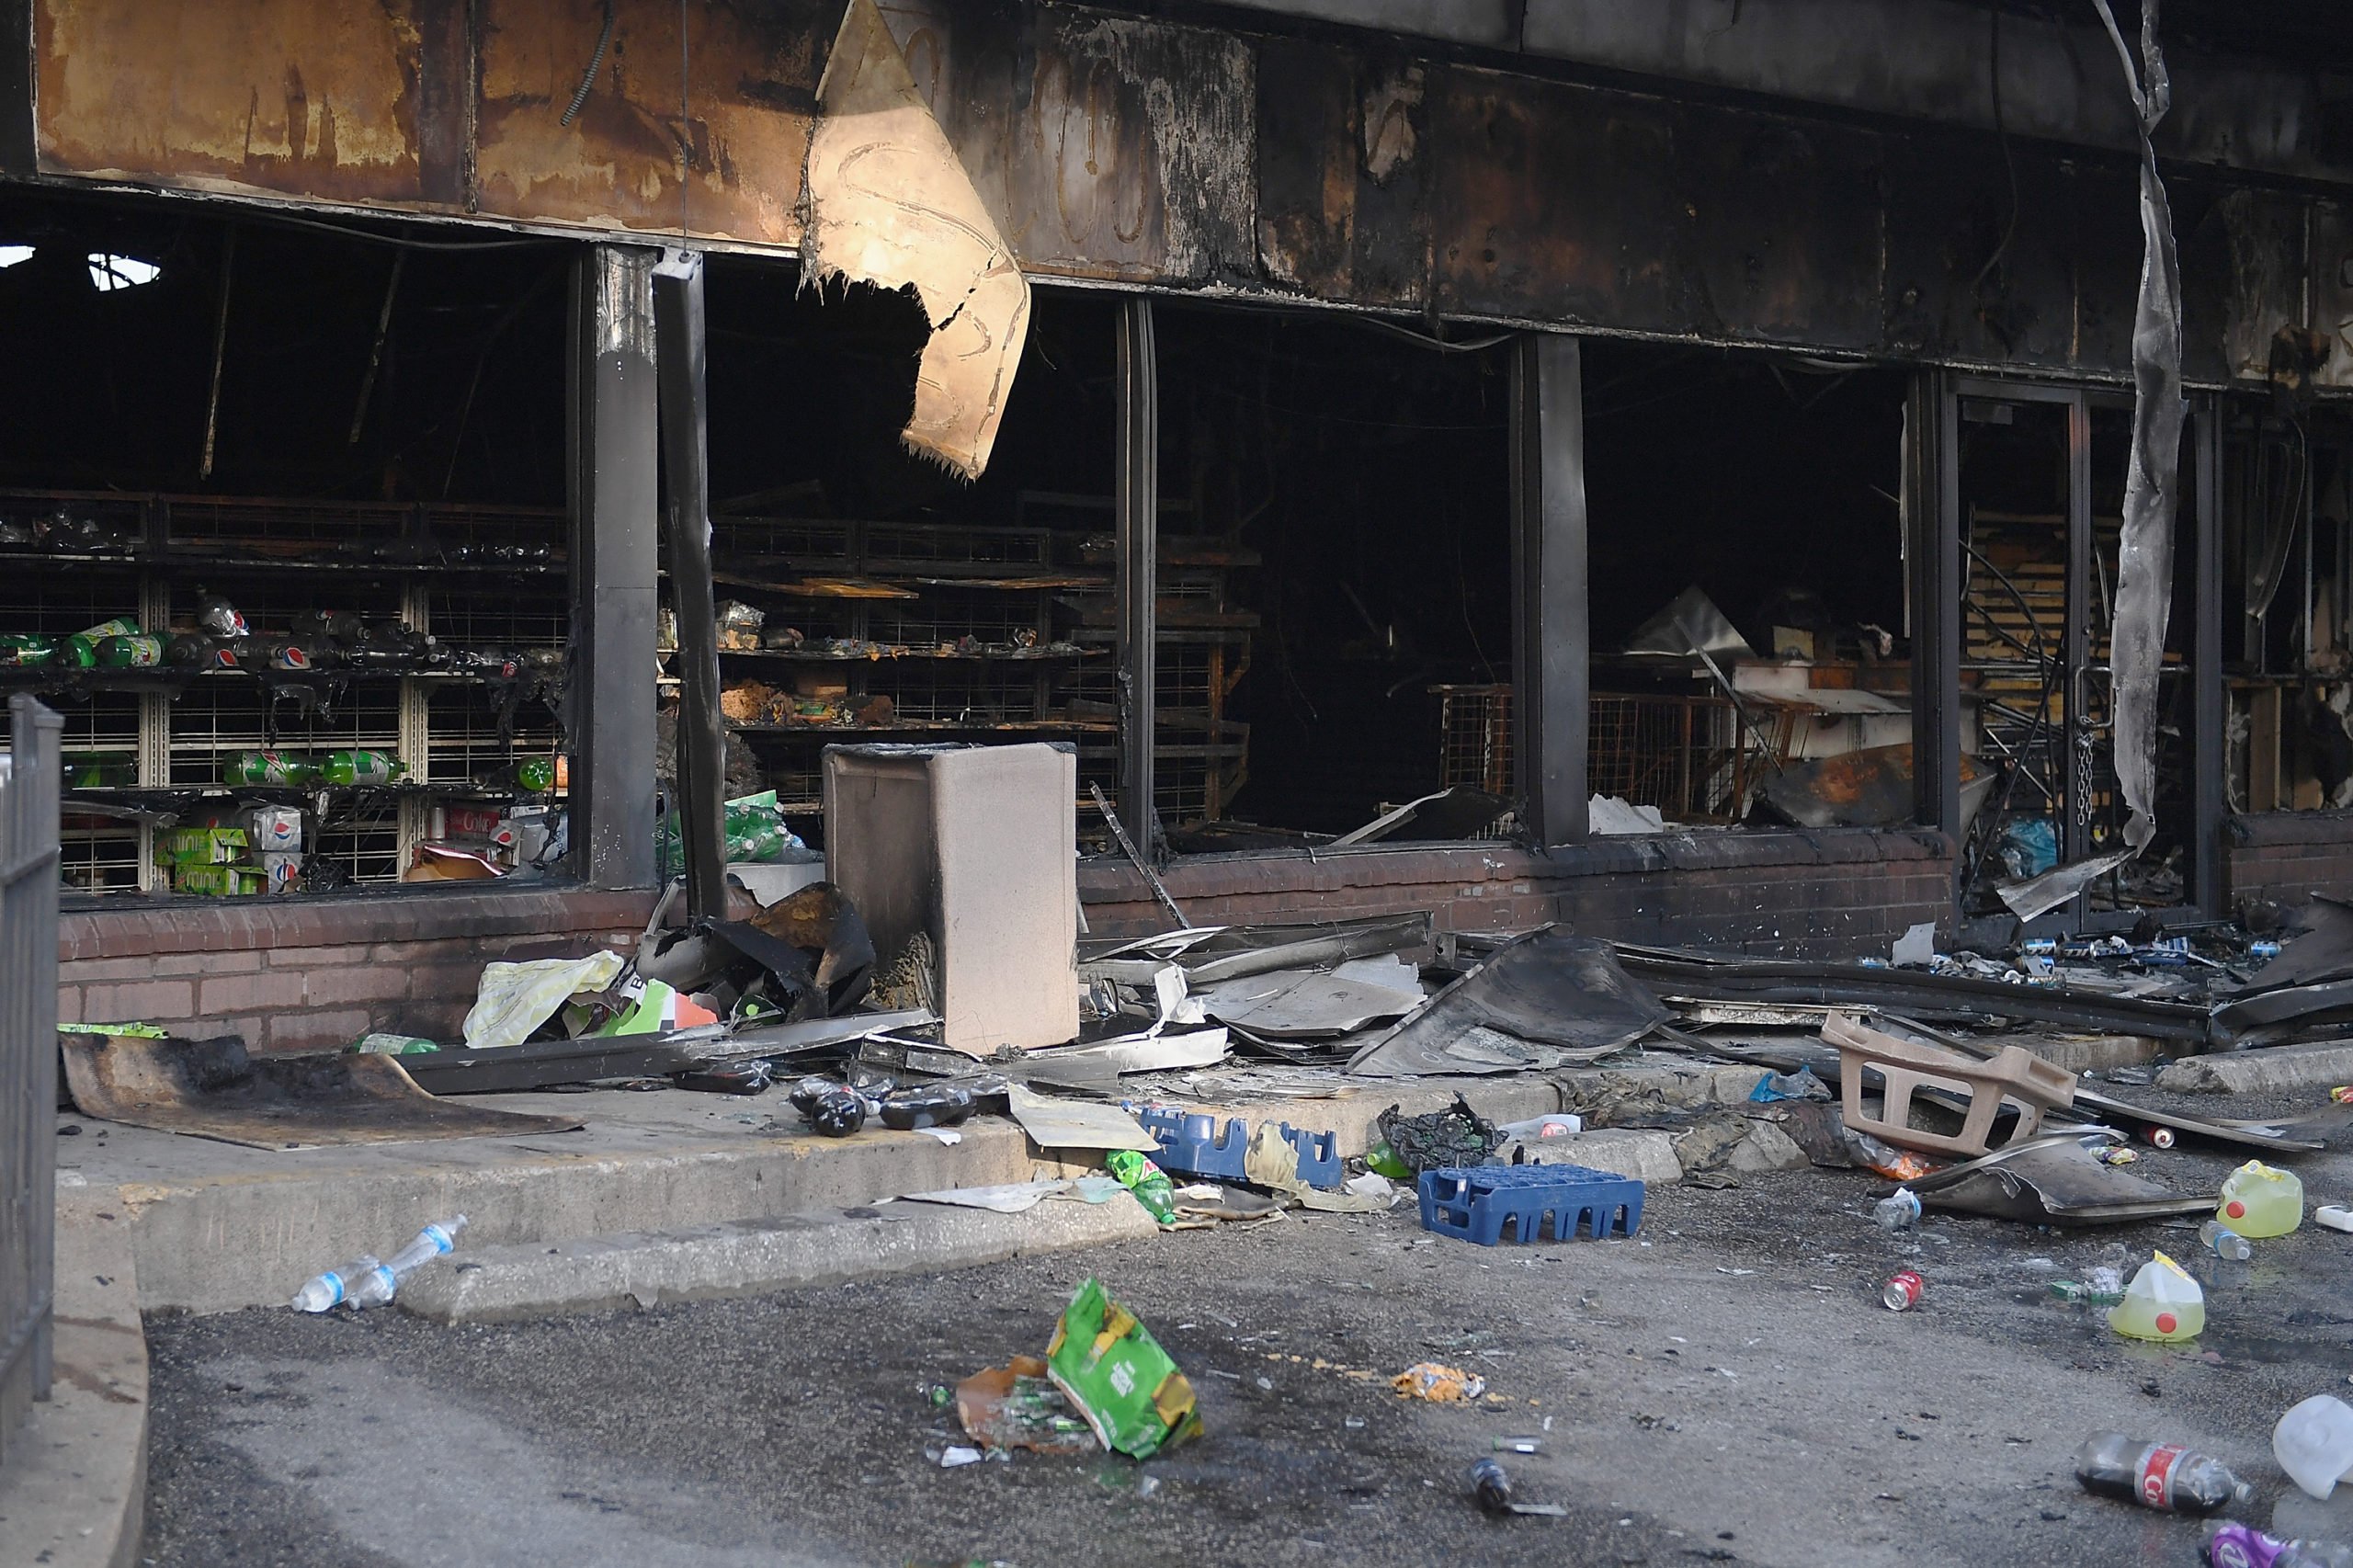 ST LOUIS, MO - JUNE 2: A 7Eleven is seen damaged after being set on fire during riots and looting overnight on June 2, 2020 in St Louis, Missouri. Four police officers were reportedly shot in St. Louis overnight during violent clashes with protesters leading to looting and damage to local businesses. (Photo by Michael B. Thomas/Getty Images)